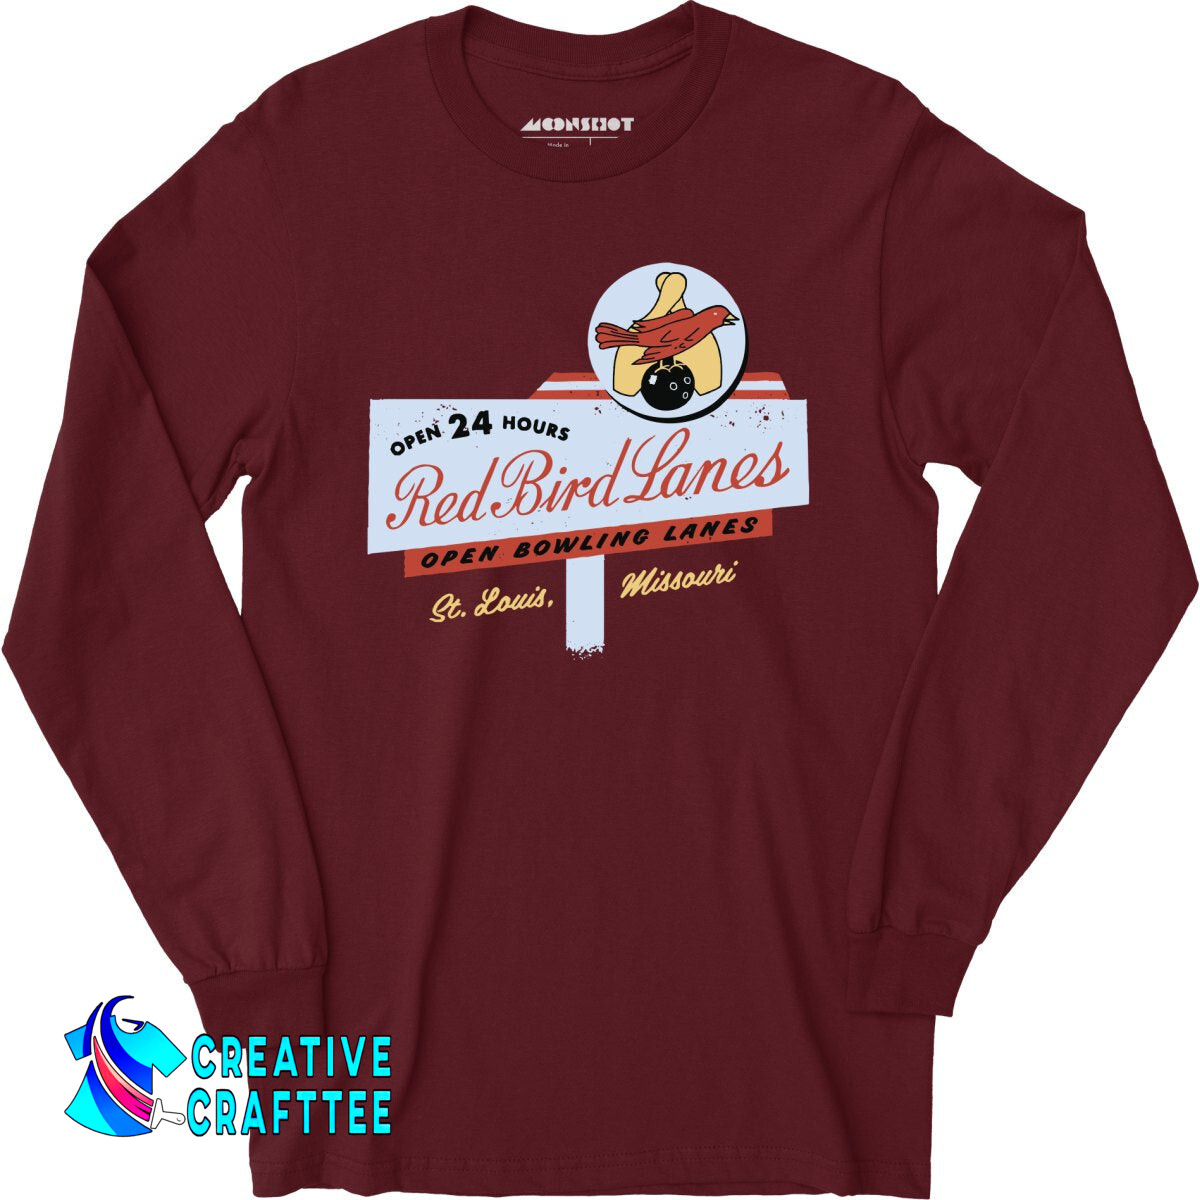 Red Bird Lanes v2 - St. Louis, MO - Vintage Bowling Alley - Long Sleeve ...